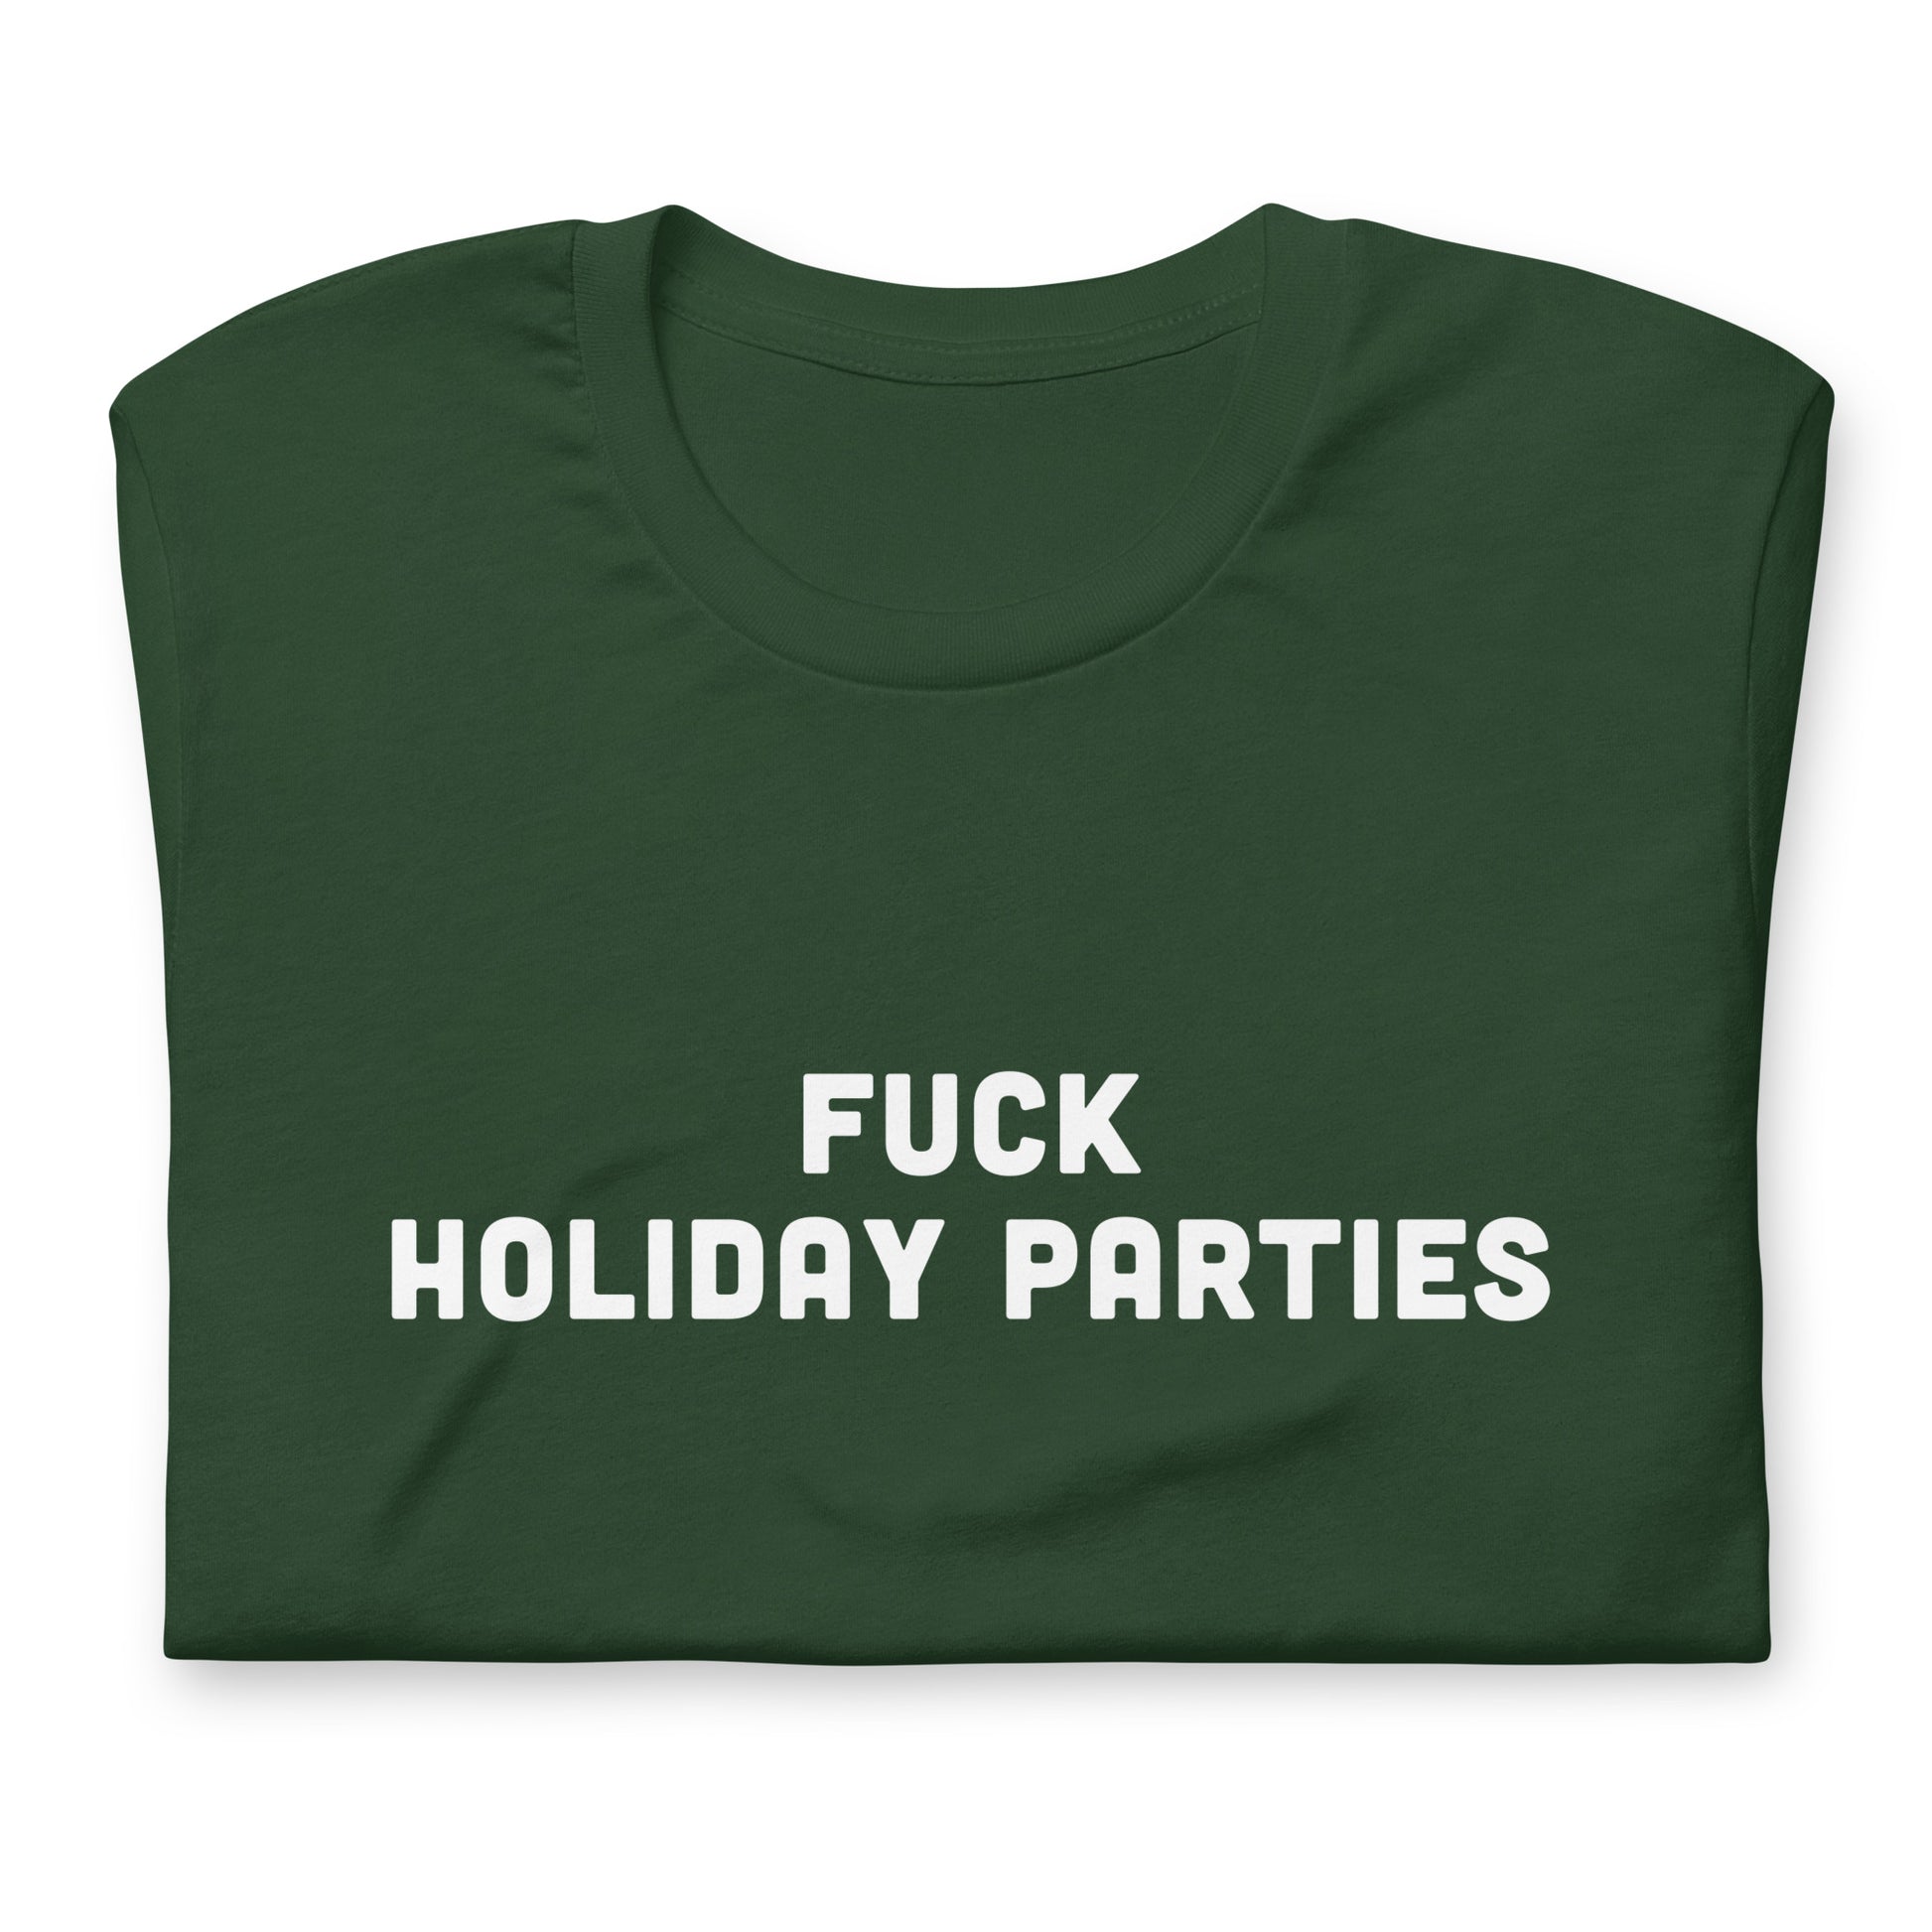 Fuck Holiday Parties T-Shirt Size 2XL Color Black